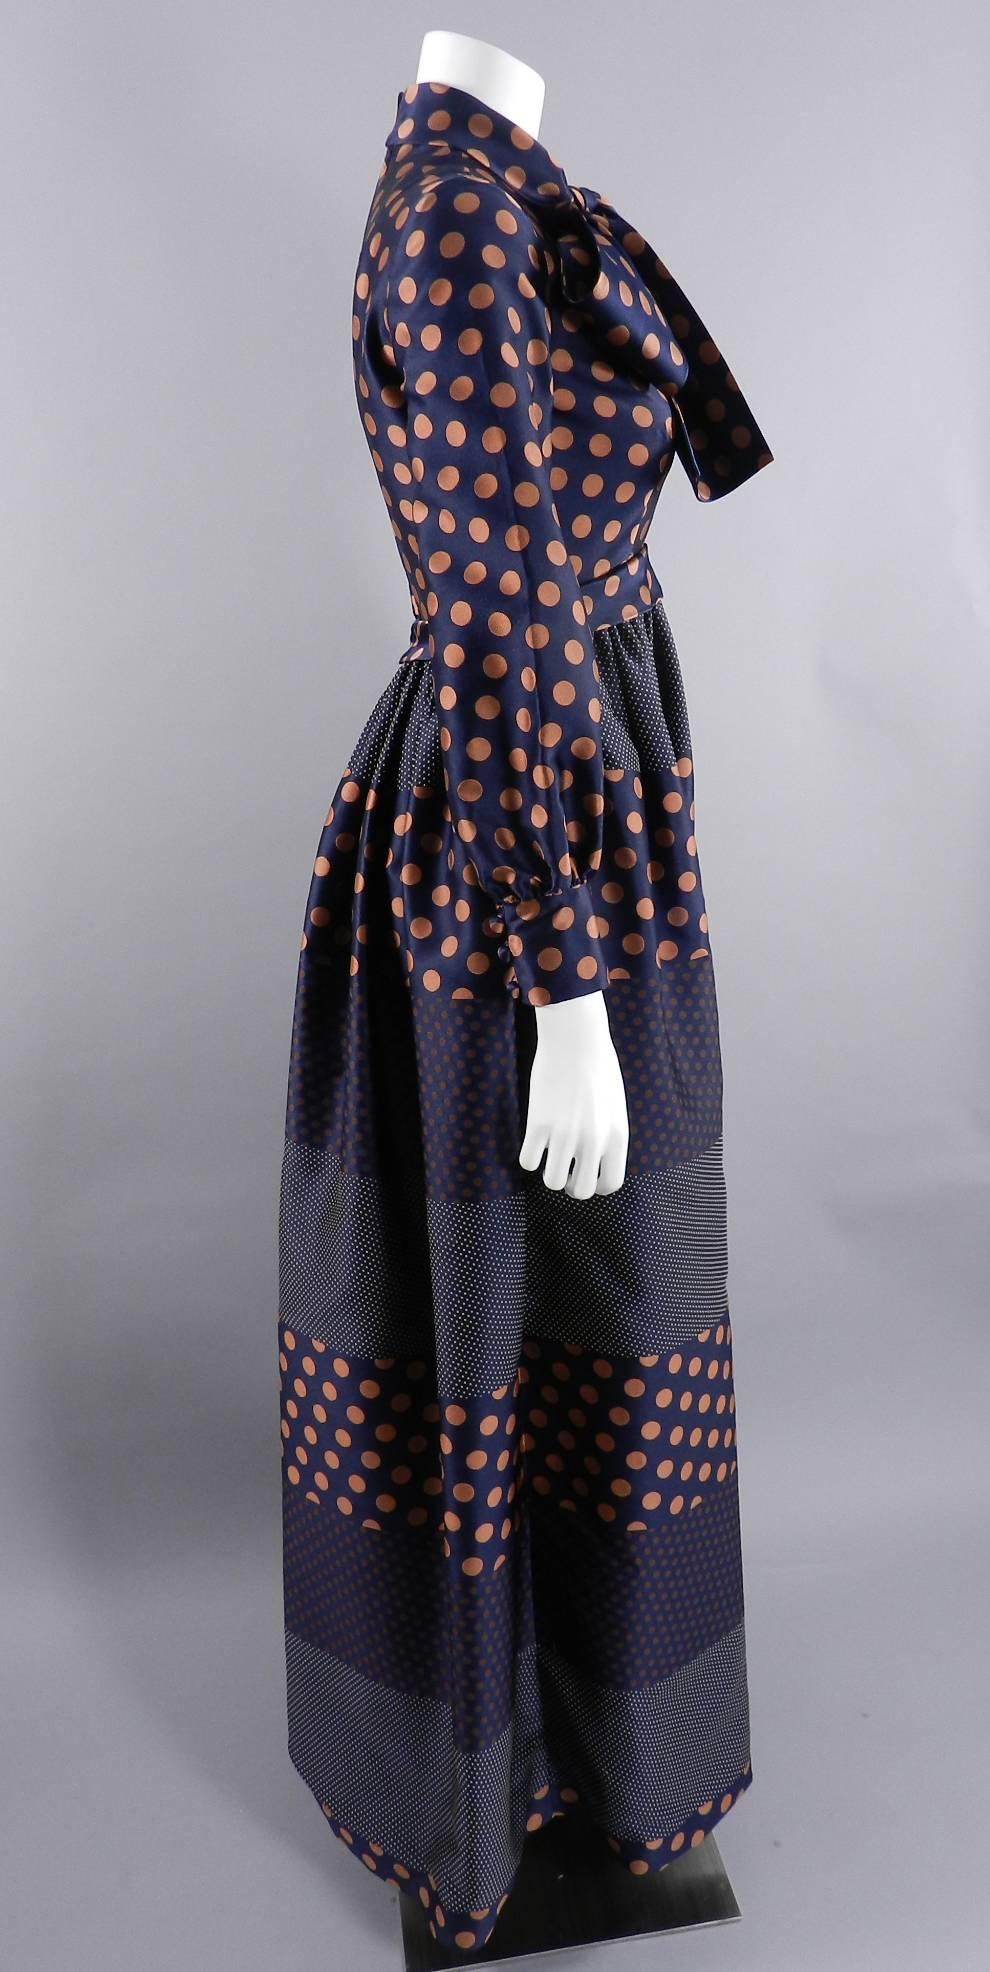 Geoffrey Beene vintage 1970's gown with bow at neck. Polkadots, centre metal back zipper, fitted cuffs fasten with covered buttons. Freshly drycleaned / excellent condition. Approximate size USA 6. Bust to fit 34", raised empire waist is